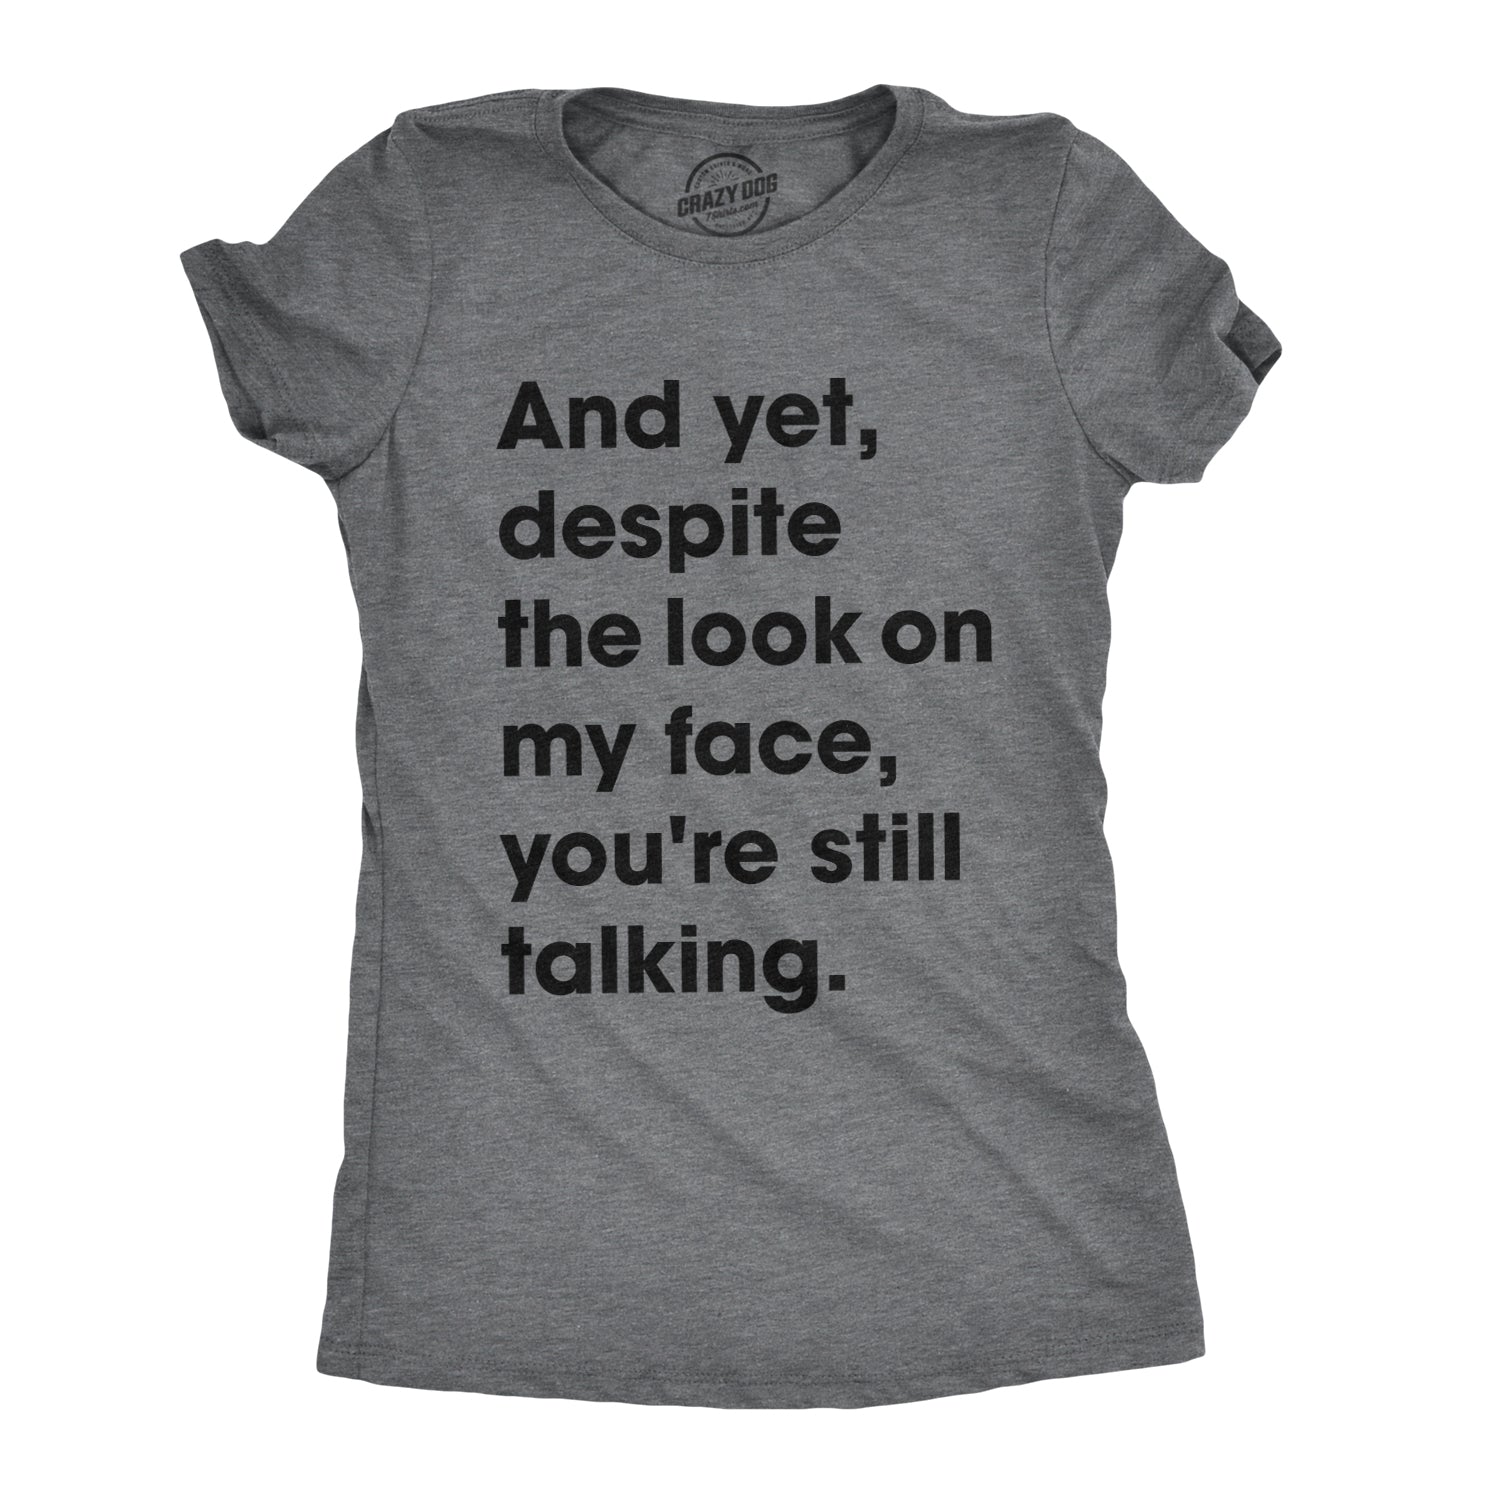 Funny Dark Heather Grey - Still Talking And Yet, Despite The Look On My Face, You're Still Talking Womens T Shirt Nerdy Sarcastic Tee